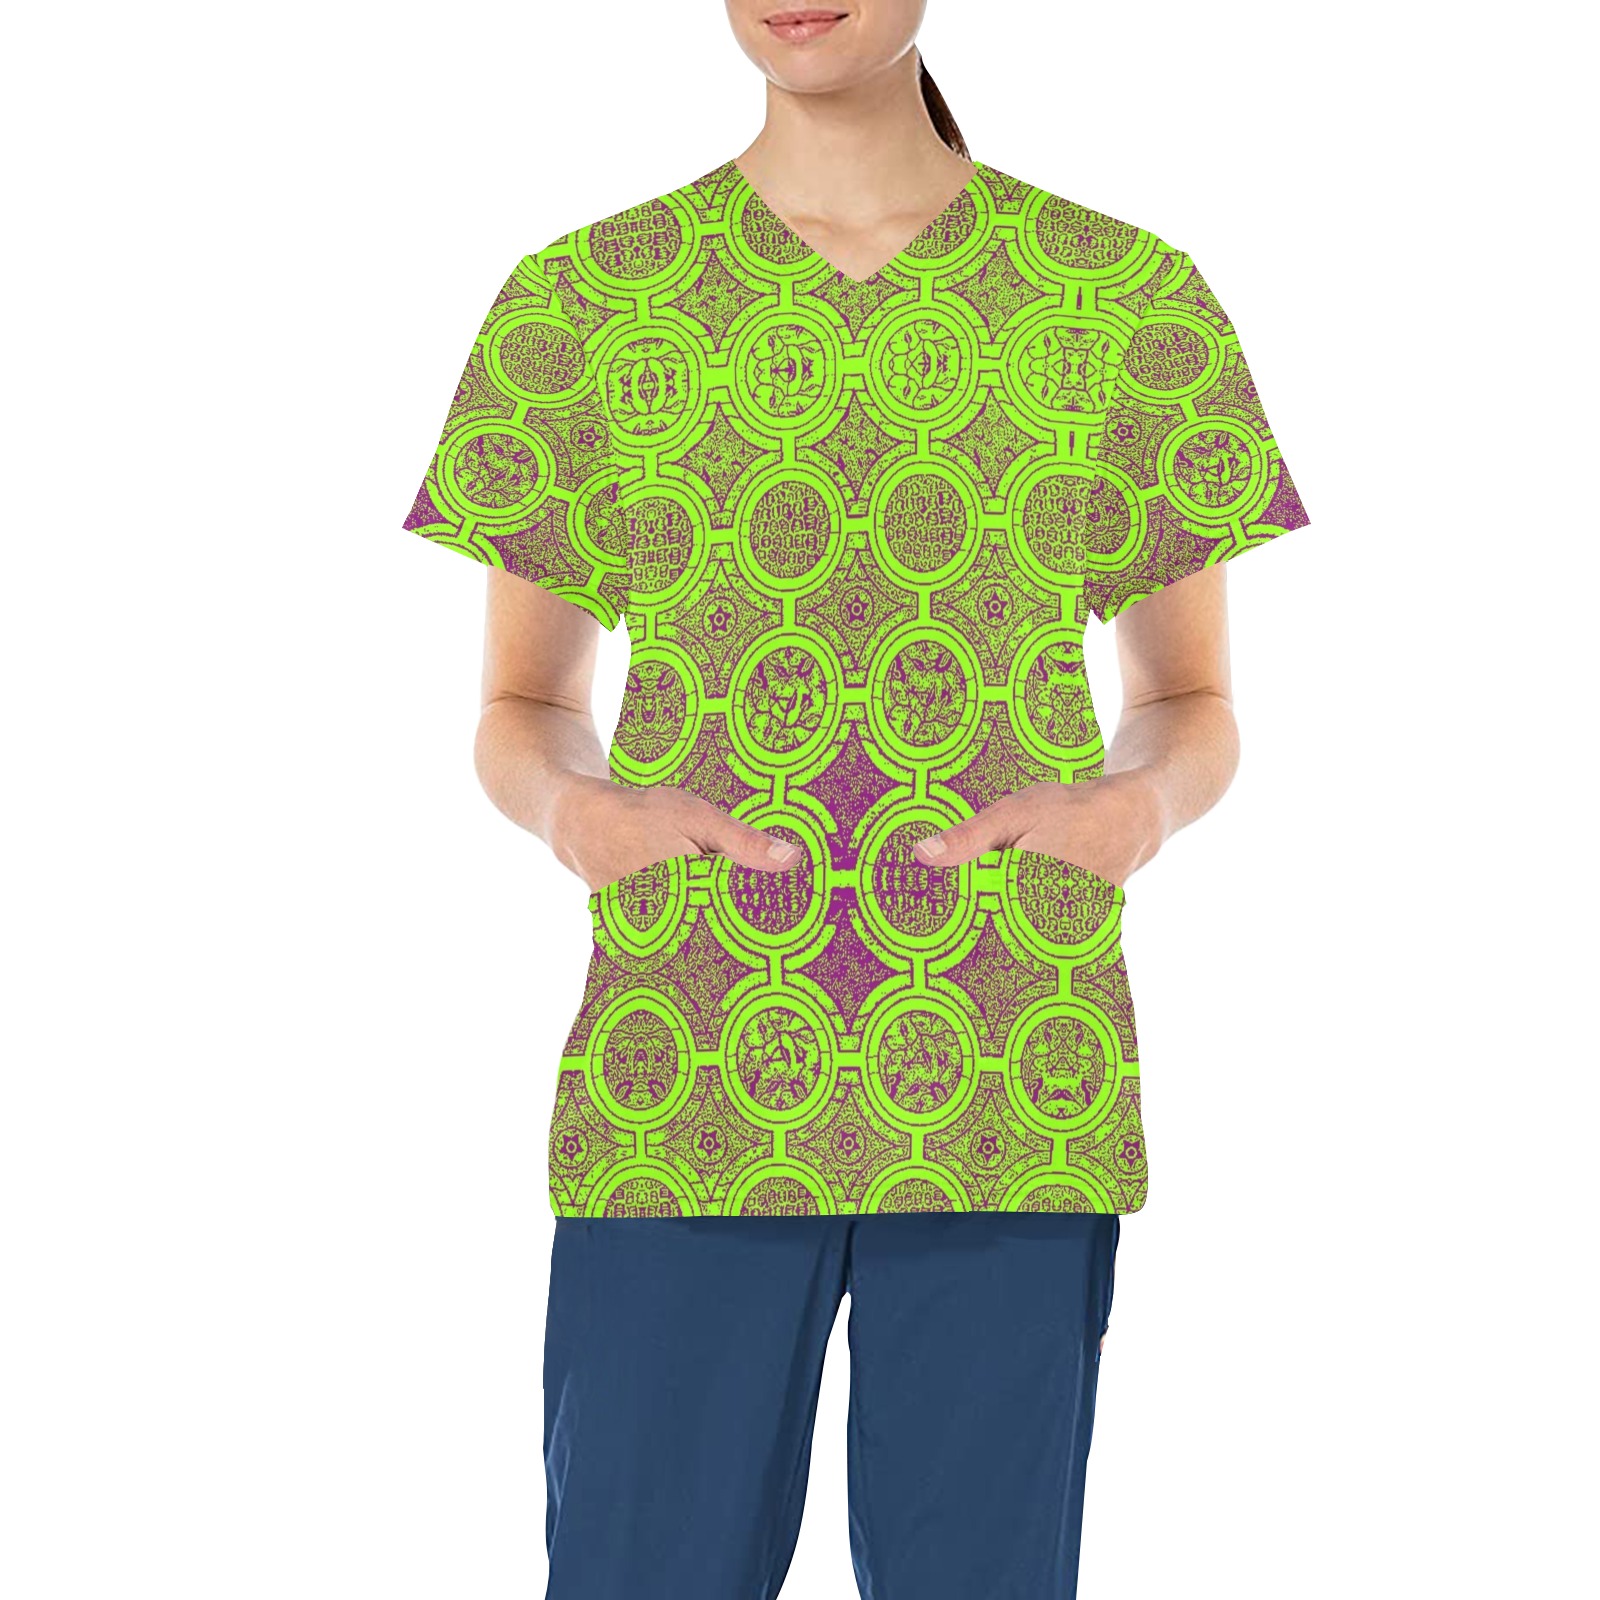 AFRICAN PRINT PATTERN 2 All Over Print Scrub Top